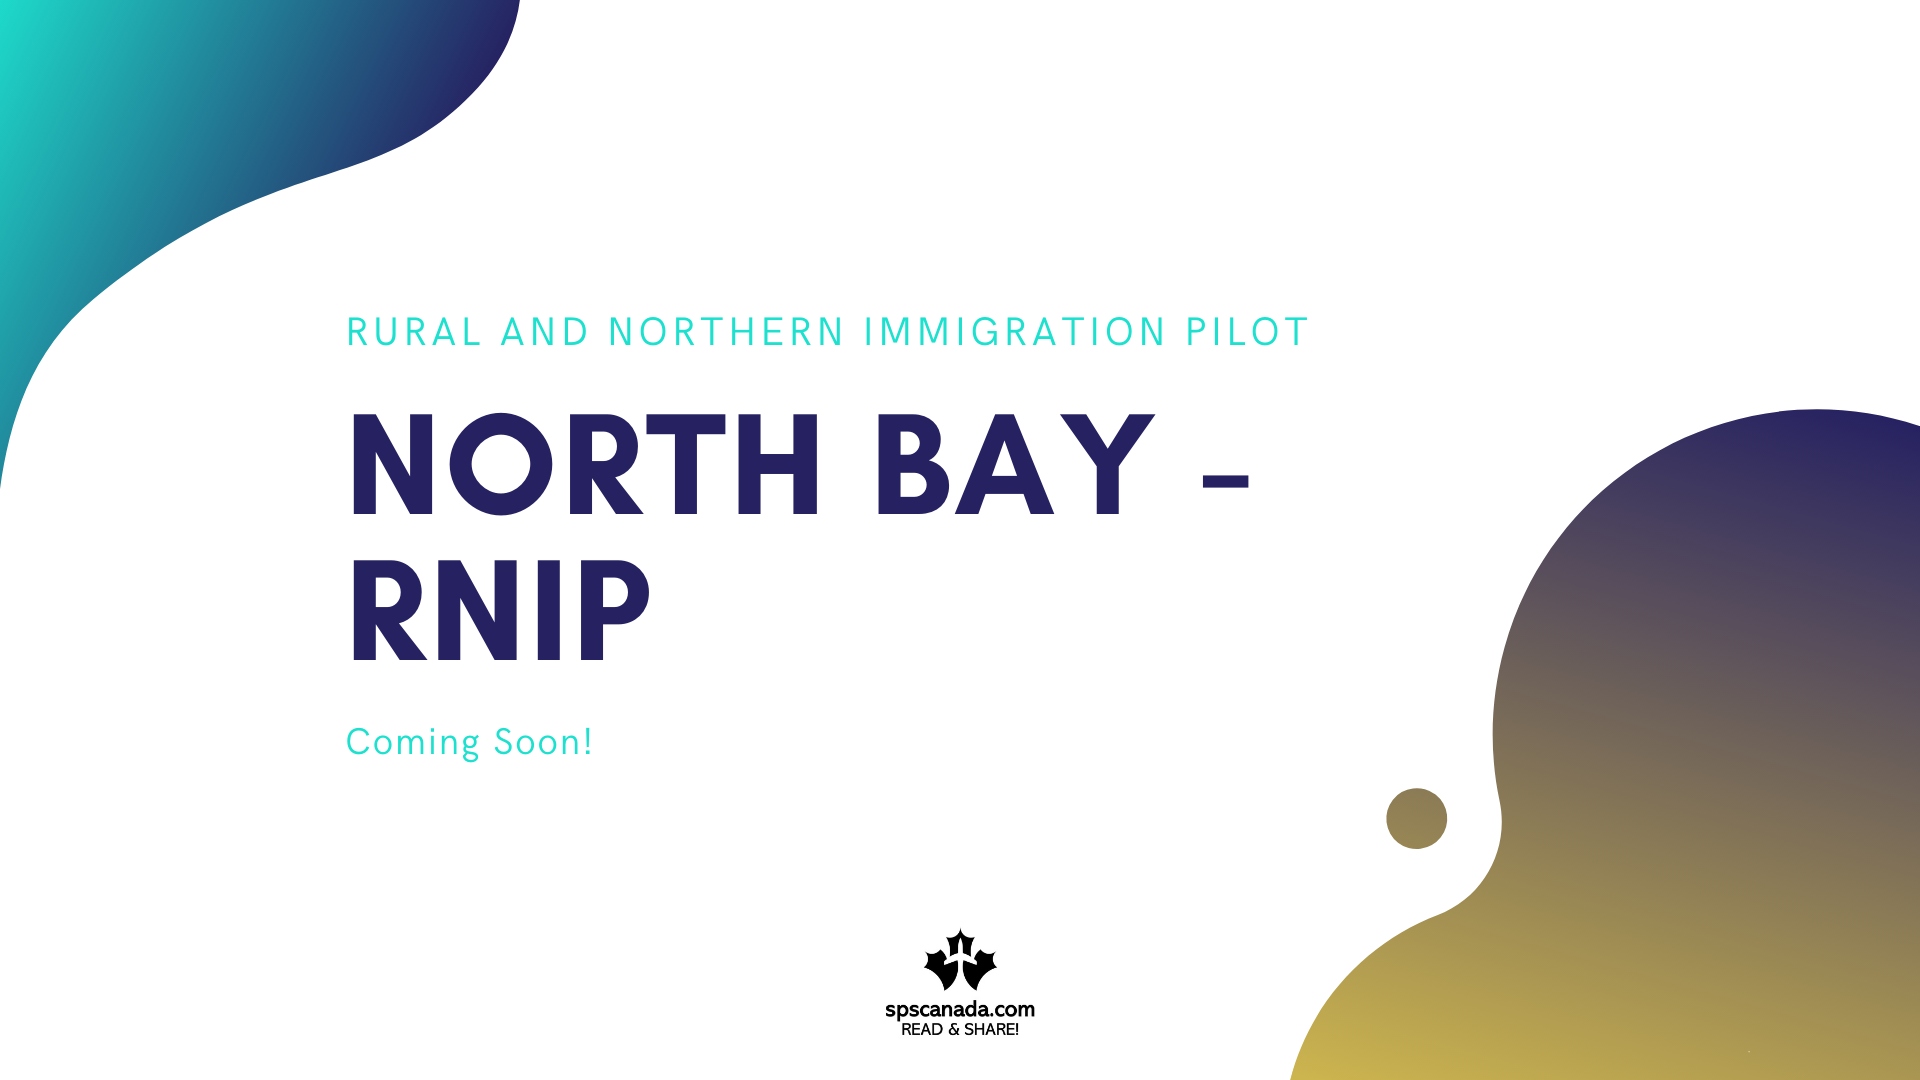 A City in Ontario, North Bay is launching the Rural and Northern Immigration Pilot Soon